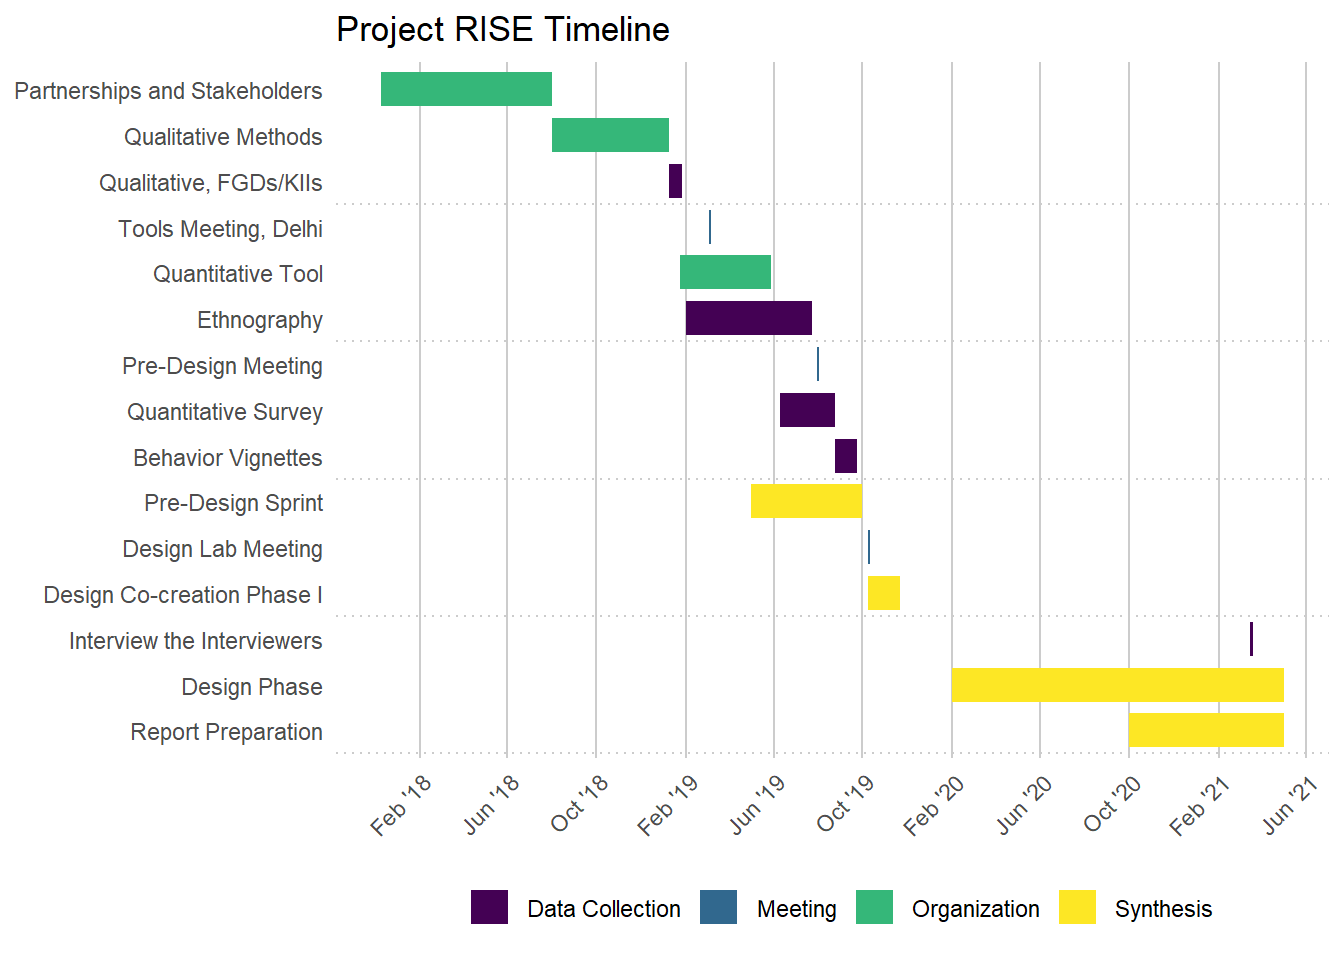 Project RISE: Timeline for major data collection and synthesis efforts